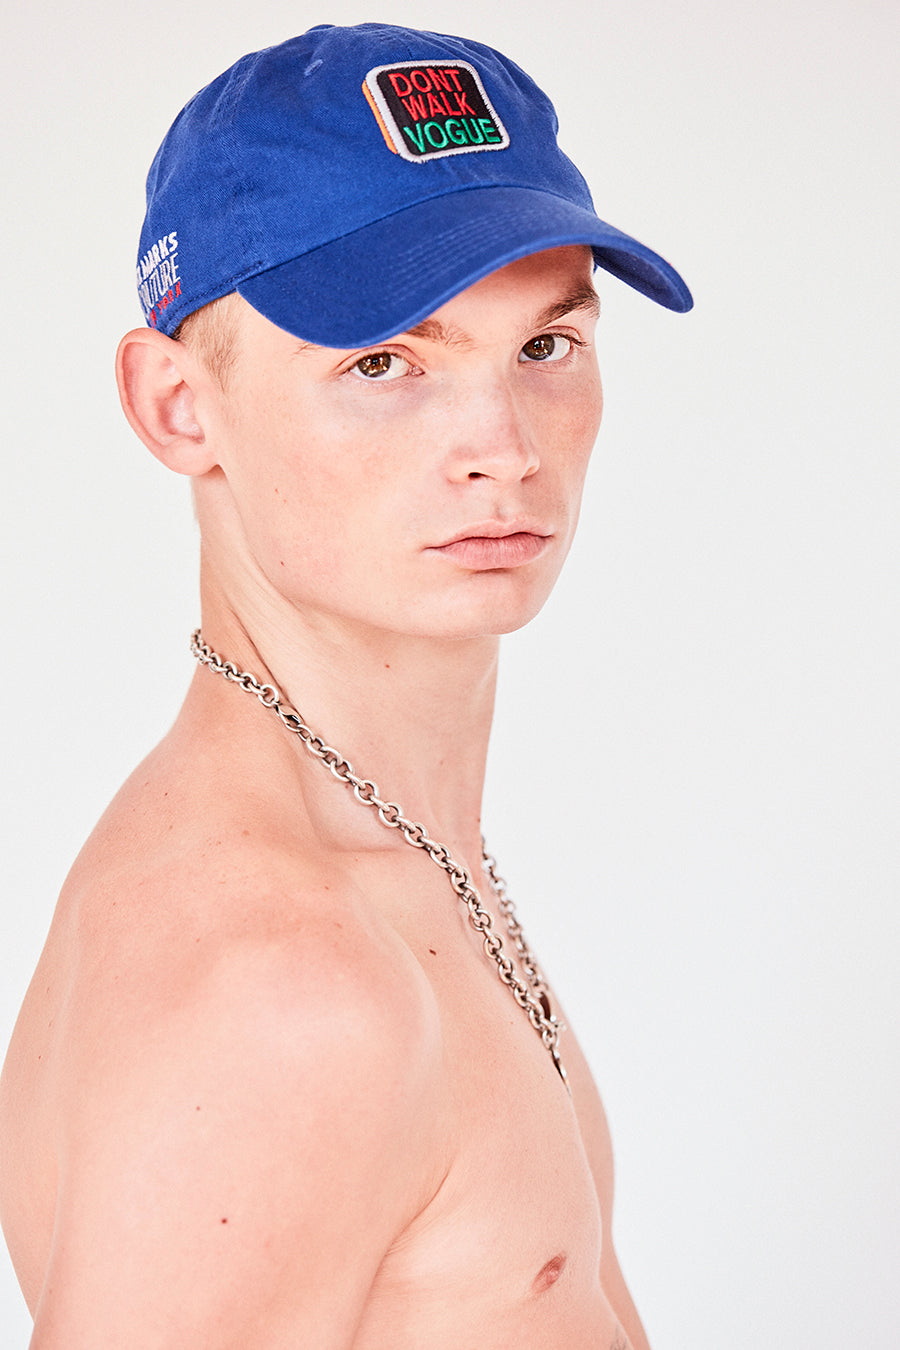 Brand New. New York Label: Stmarksnewyork.com. This Pride Month 2020, Shop The blue Dont Walk Vogue baseball cap featuring embroidery inspired by old school Walk/Dont Walk crosswalk signs. Embroidered in New York with love